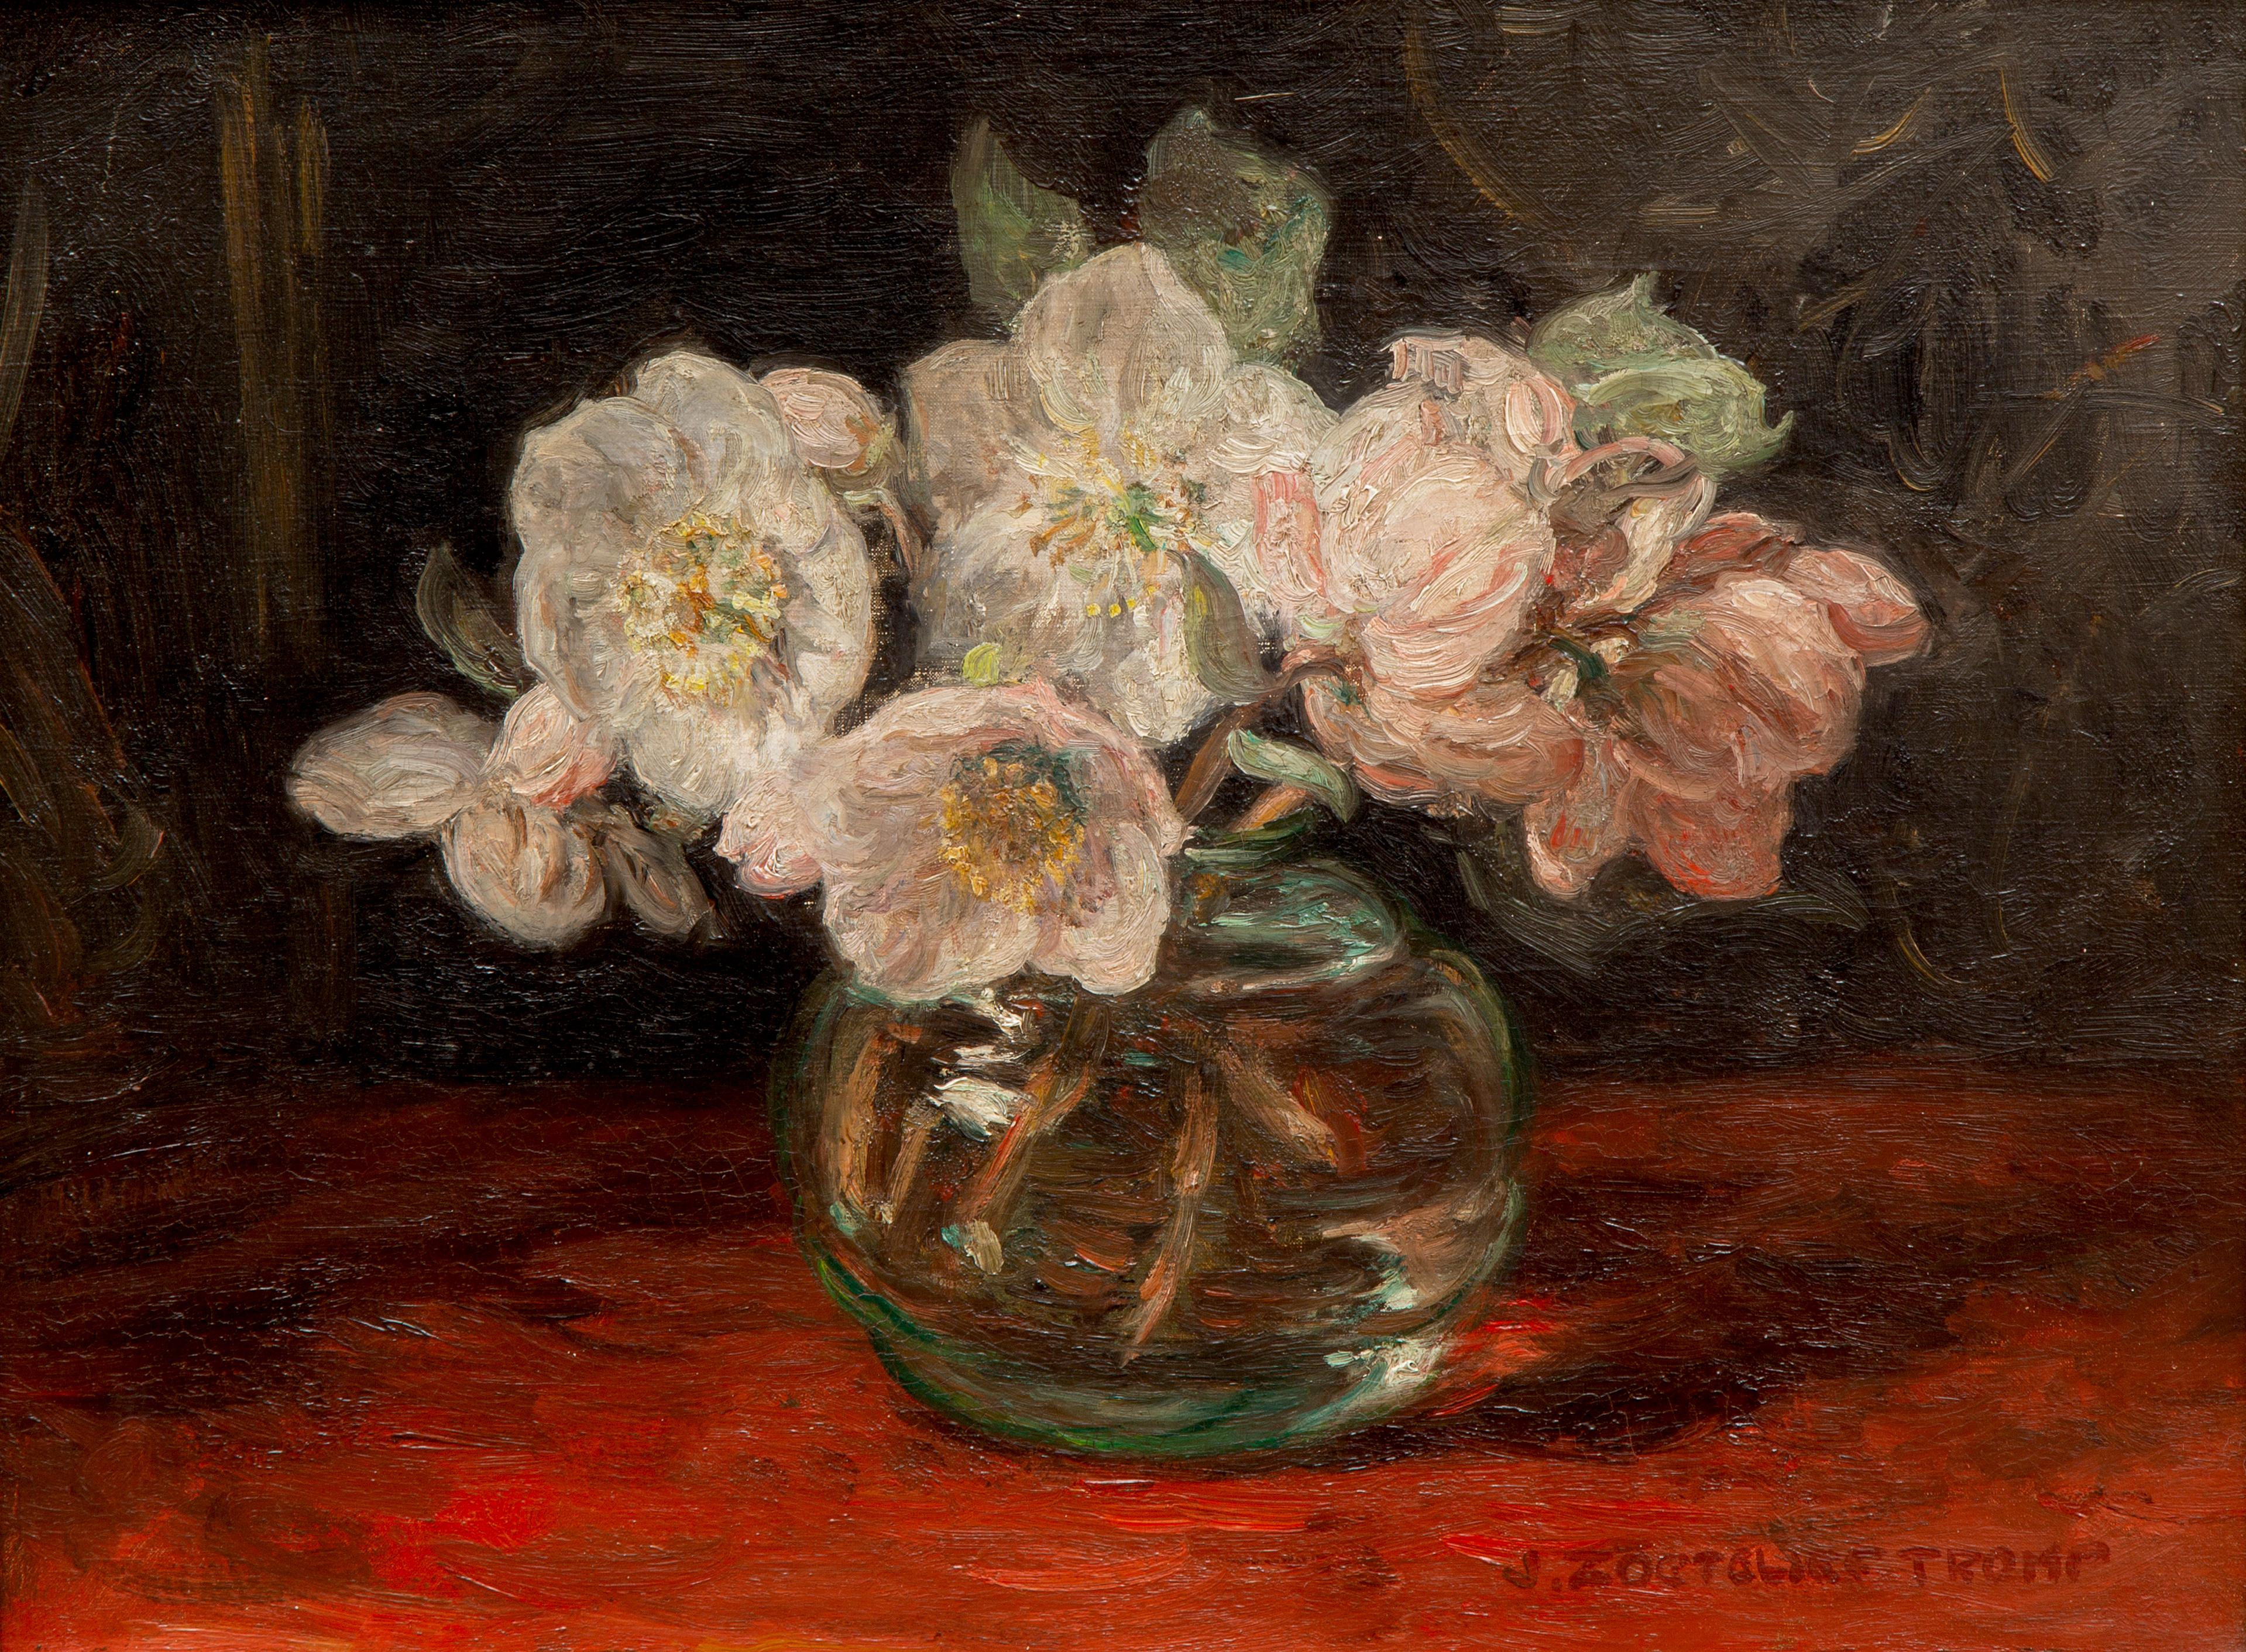 A still life with rose blossom in a glass vase